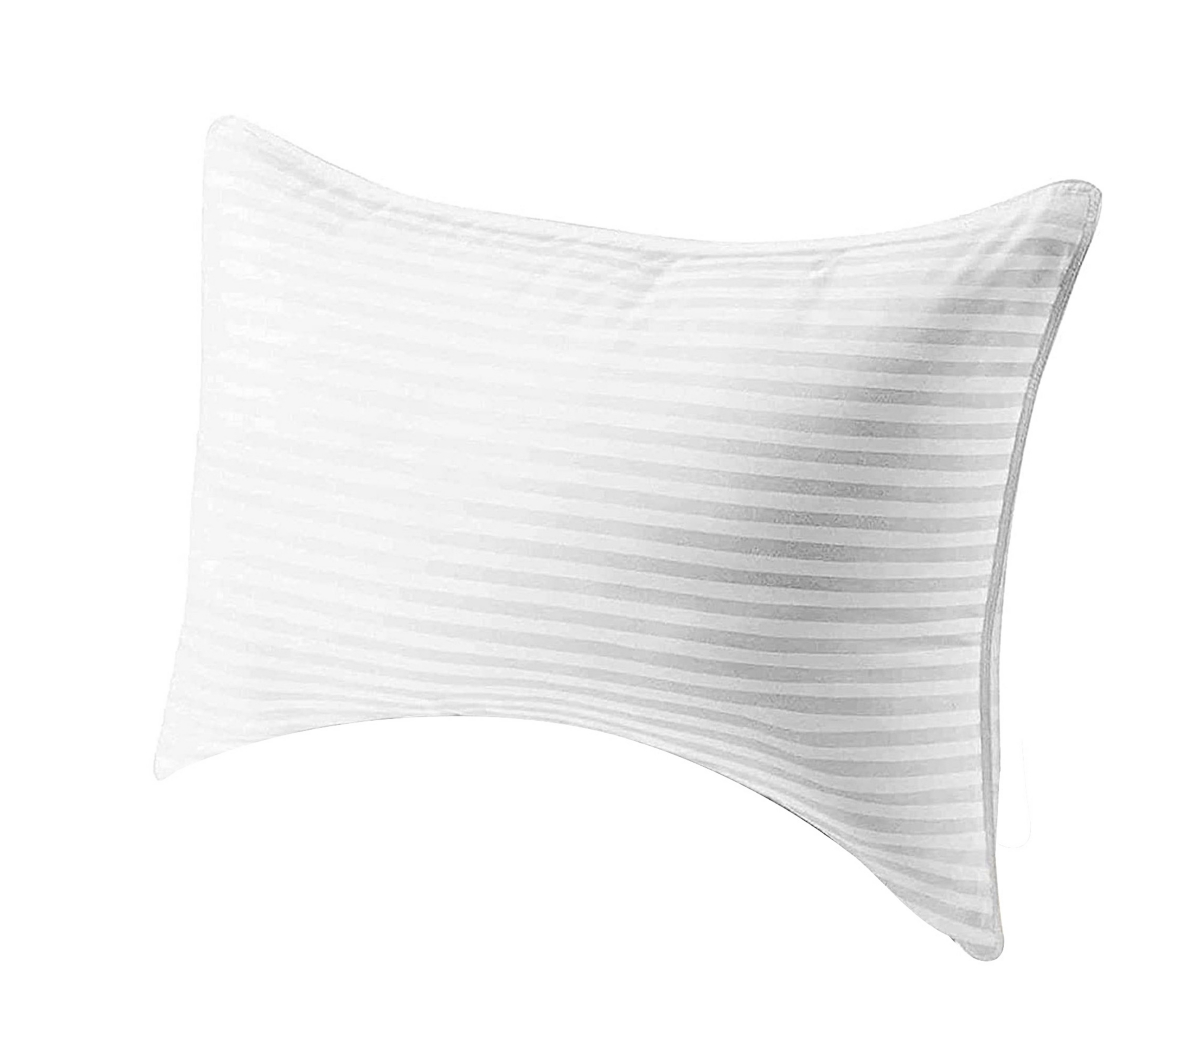 DR PILLOW HOTEL LUXURY PILLOW